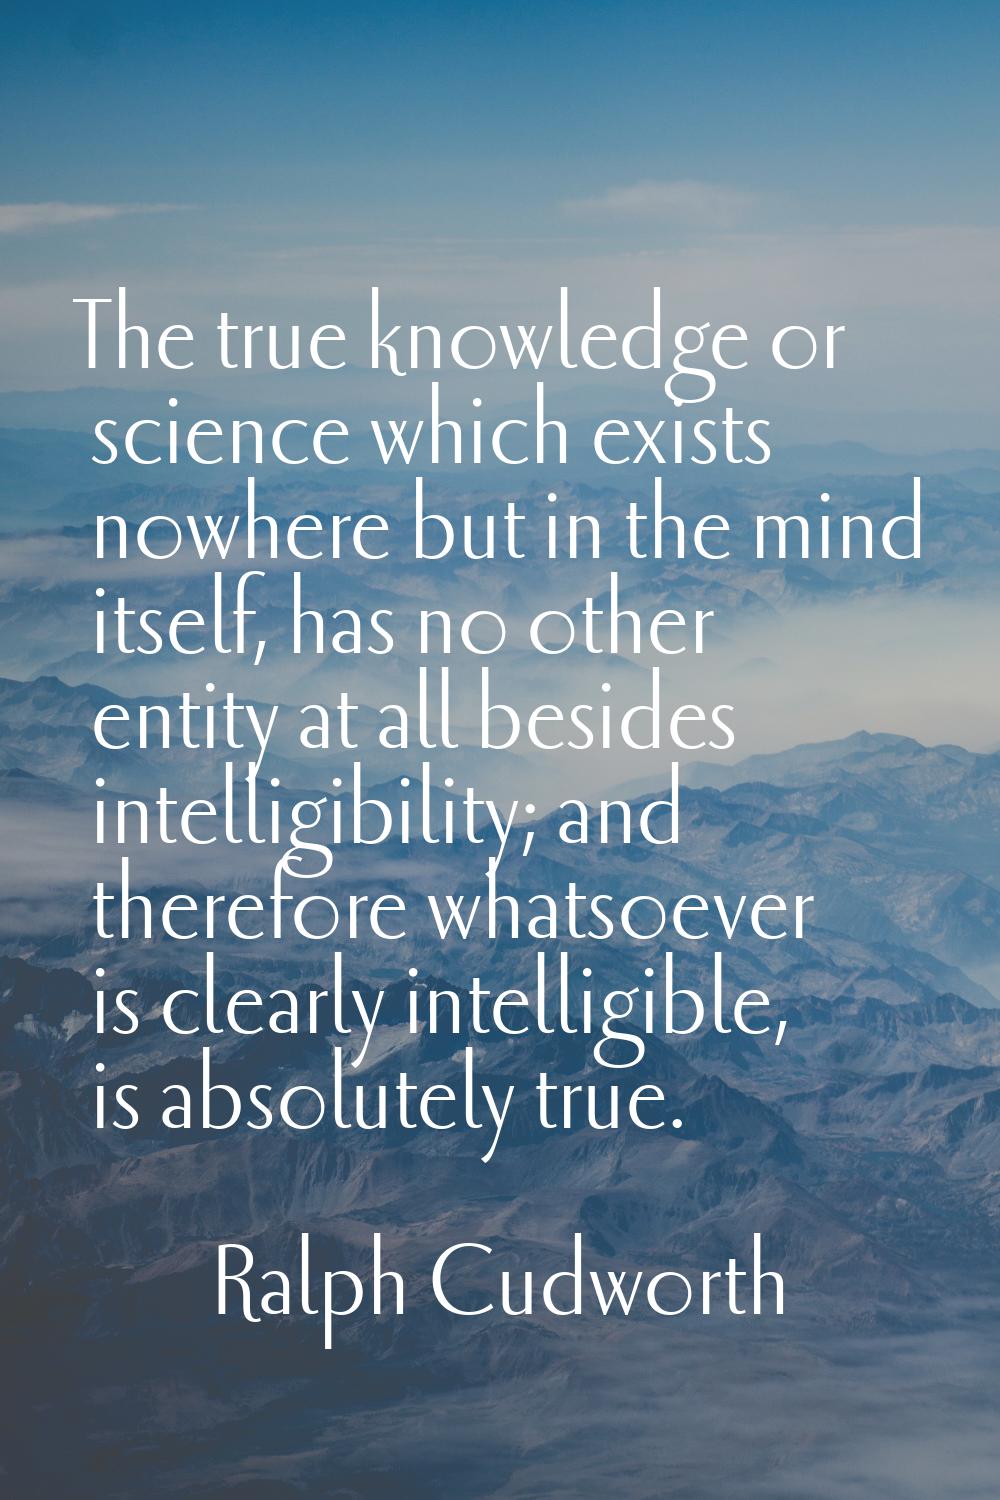 The true knowledge or science which exists nowhere but in the mind itself, has no other entity at a